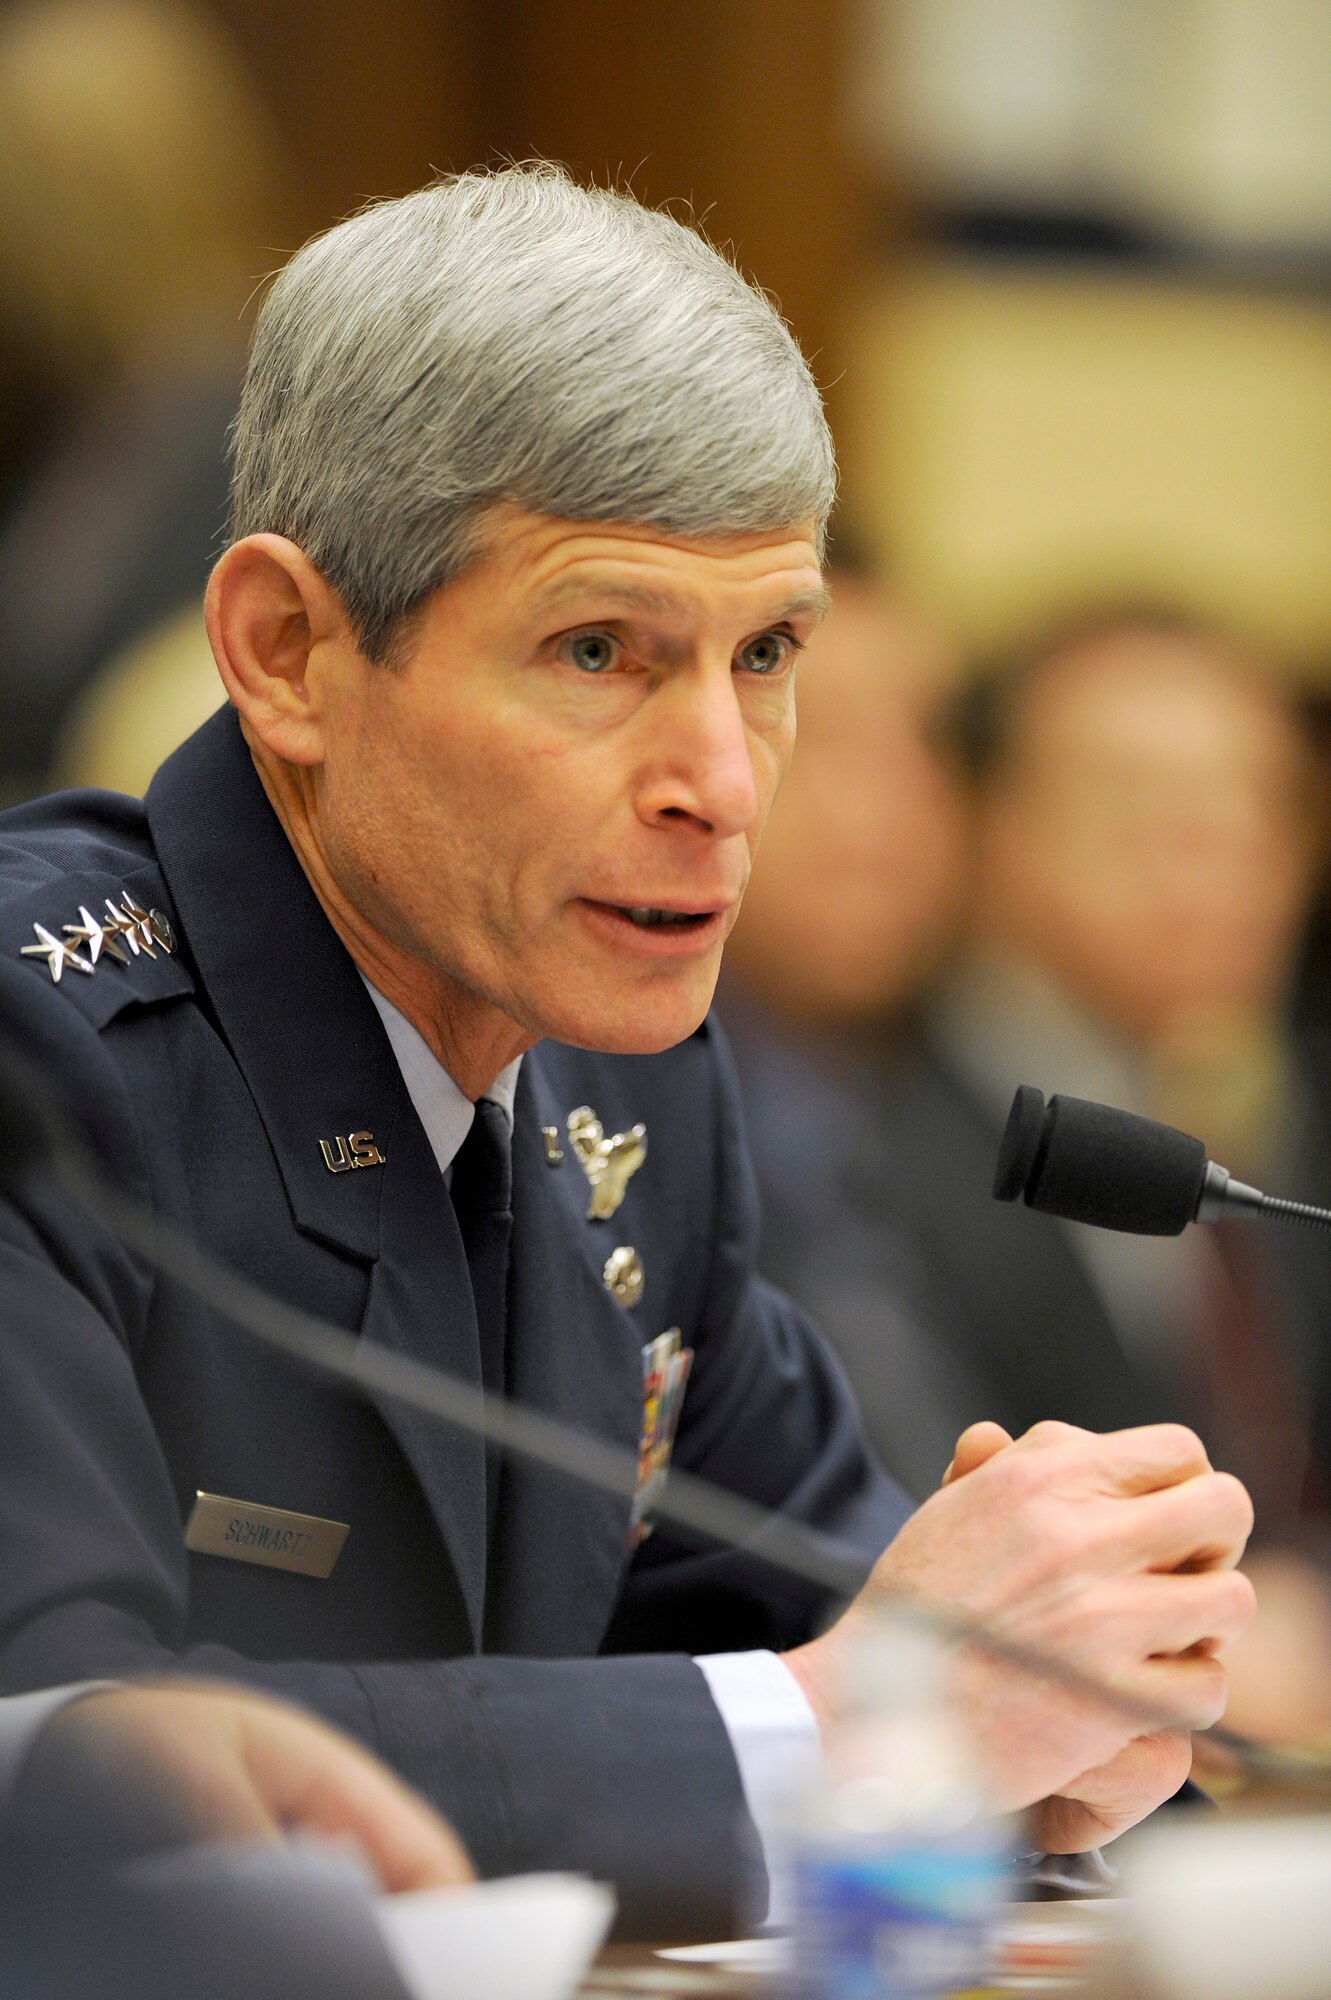 Air Force Chief of Staff Gen. Norton Schwartz serves as a witness before the House Armed Services Committee Feb. 23, 2010, in the Rayburn House Office Building on Capitol Hill.  Both General Schwartz and Secretary of the Air Force Michael Donley answered questions that heavily leaned toward the status of the F-35 Lightning II joint strike fighter program, alignment with allies in future aircraft development, force readiness and the service's position on the review of the "Don't Ask, Don't Tell" policy.  (U.S. Air Force photo/Scott M. Ash)